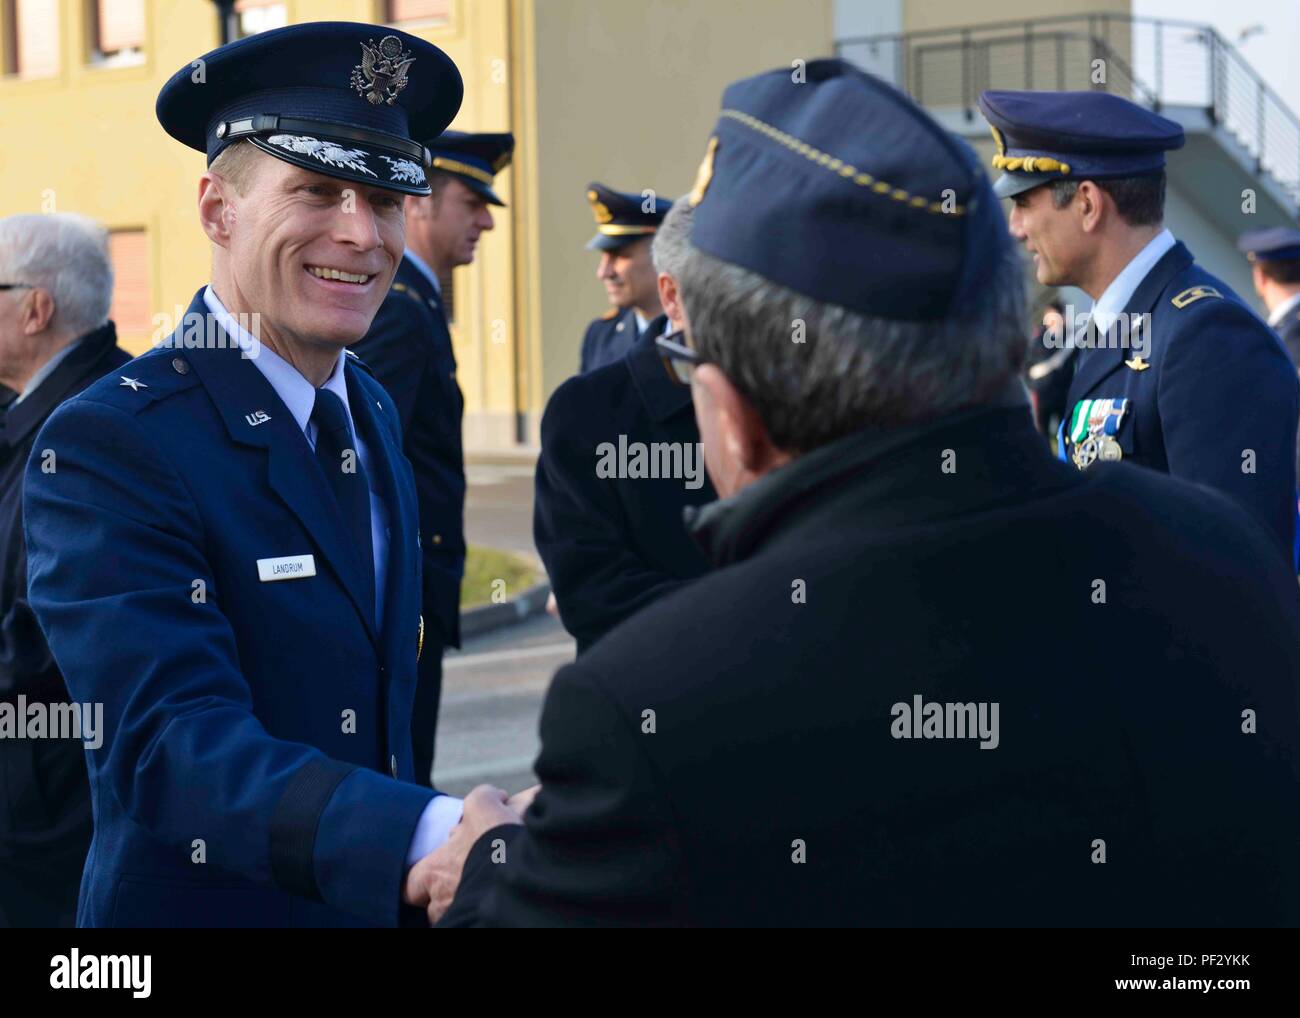 The Italian Royal Air Force was created on March 28, 1923, which became the Aeronautica Militare (Italian Air Force) later. Brig. Gen. Lance Landrum, 31st Fighter Wing commander, attended the ceremony commemorating the event. (U.S. Air Force photo by Staff Sgt. Austin Harvill) Stock Photo